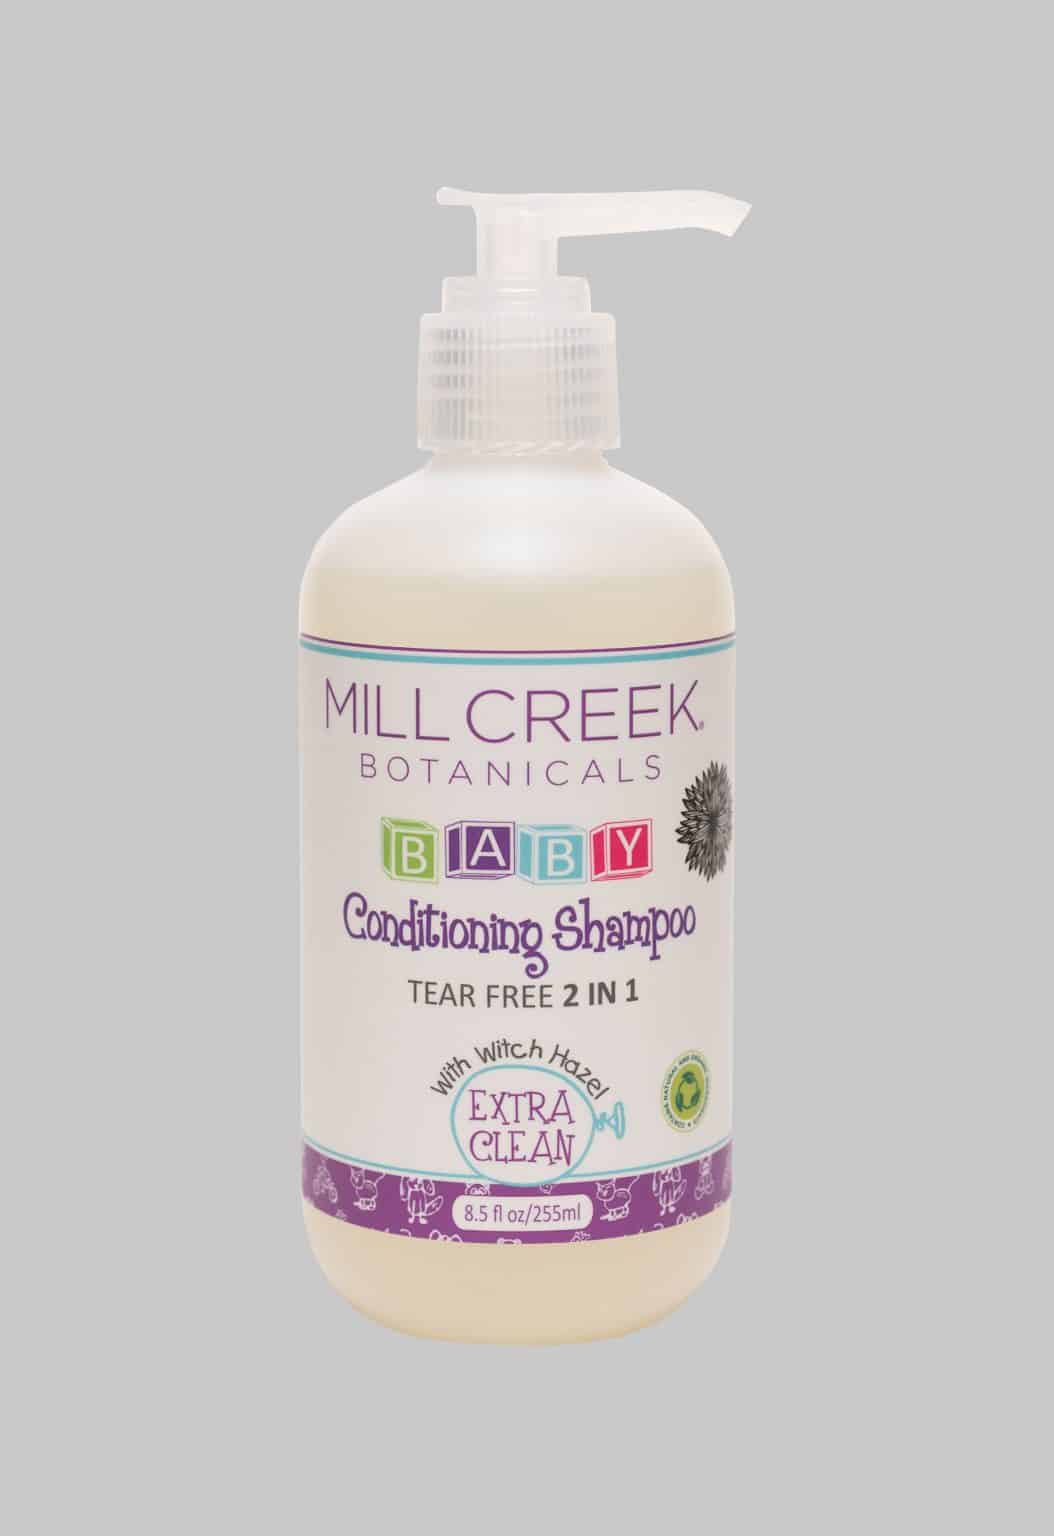 Mill Creek Baby Conditioning Shampoo Tear Free 2 in 1